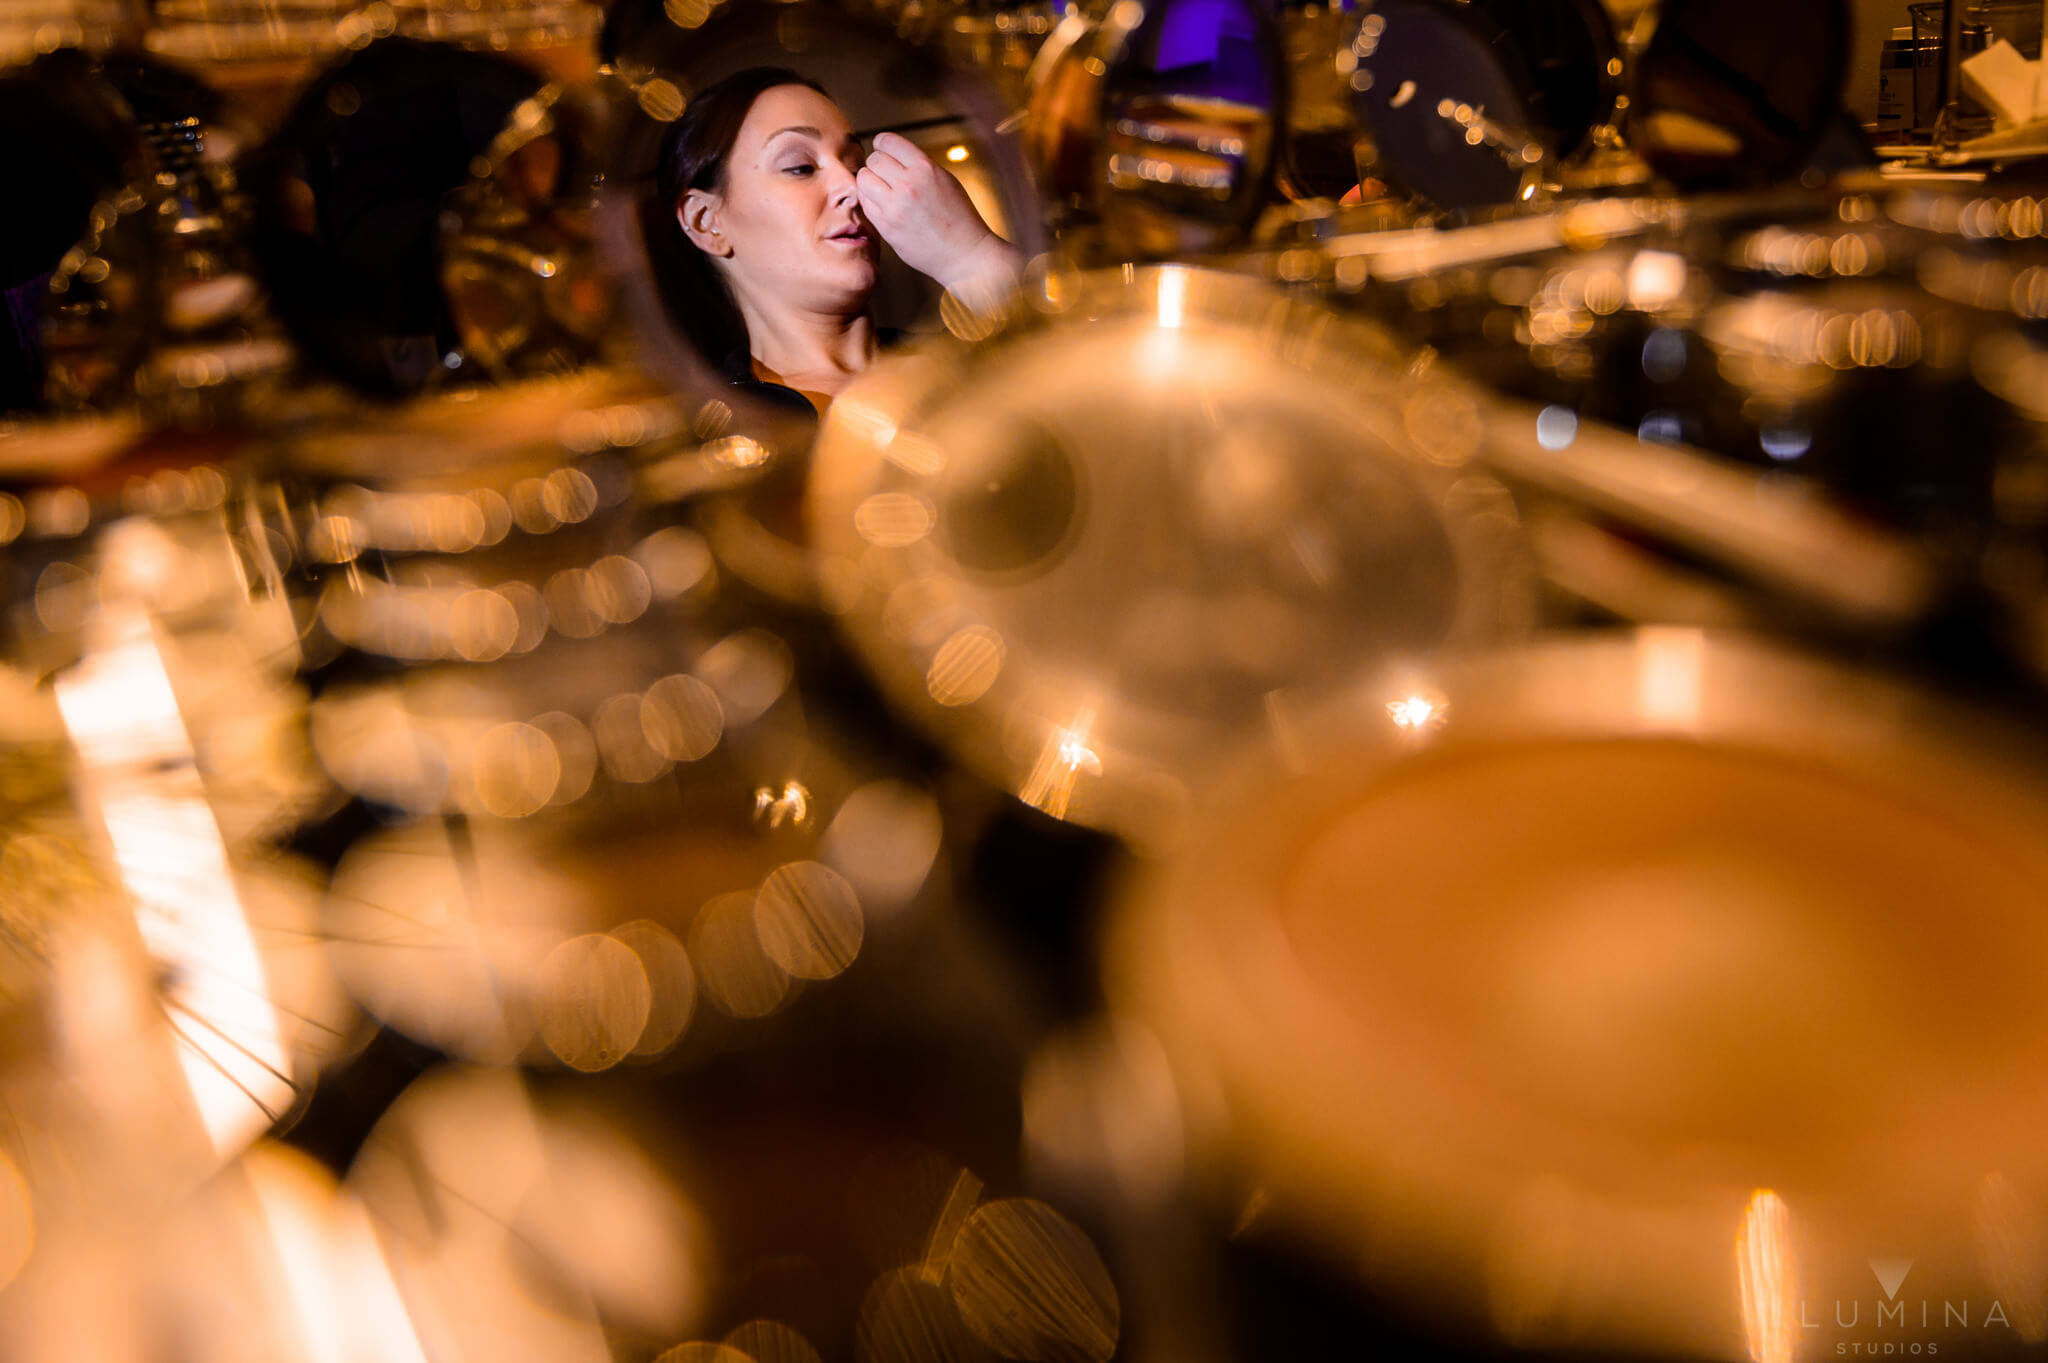 Creative color photo of woman applying makeup with blurry gold in foreground